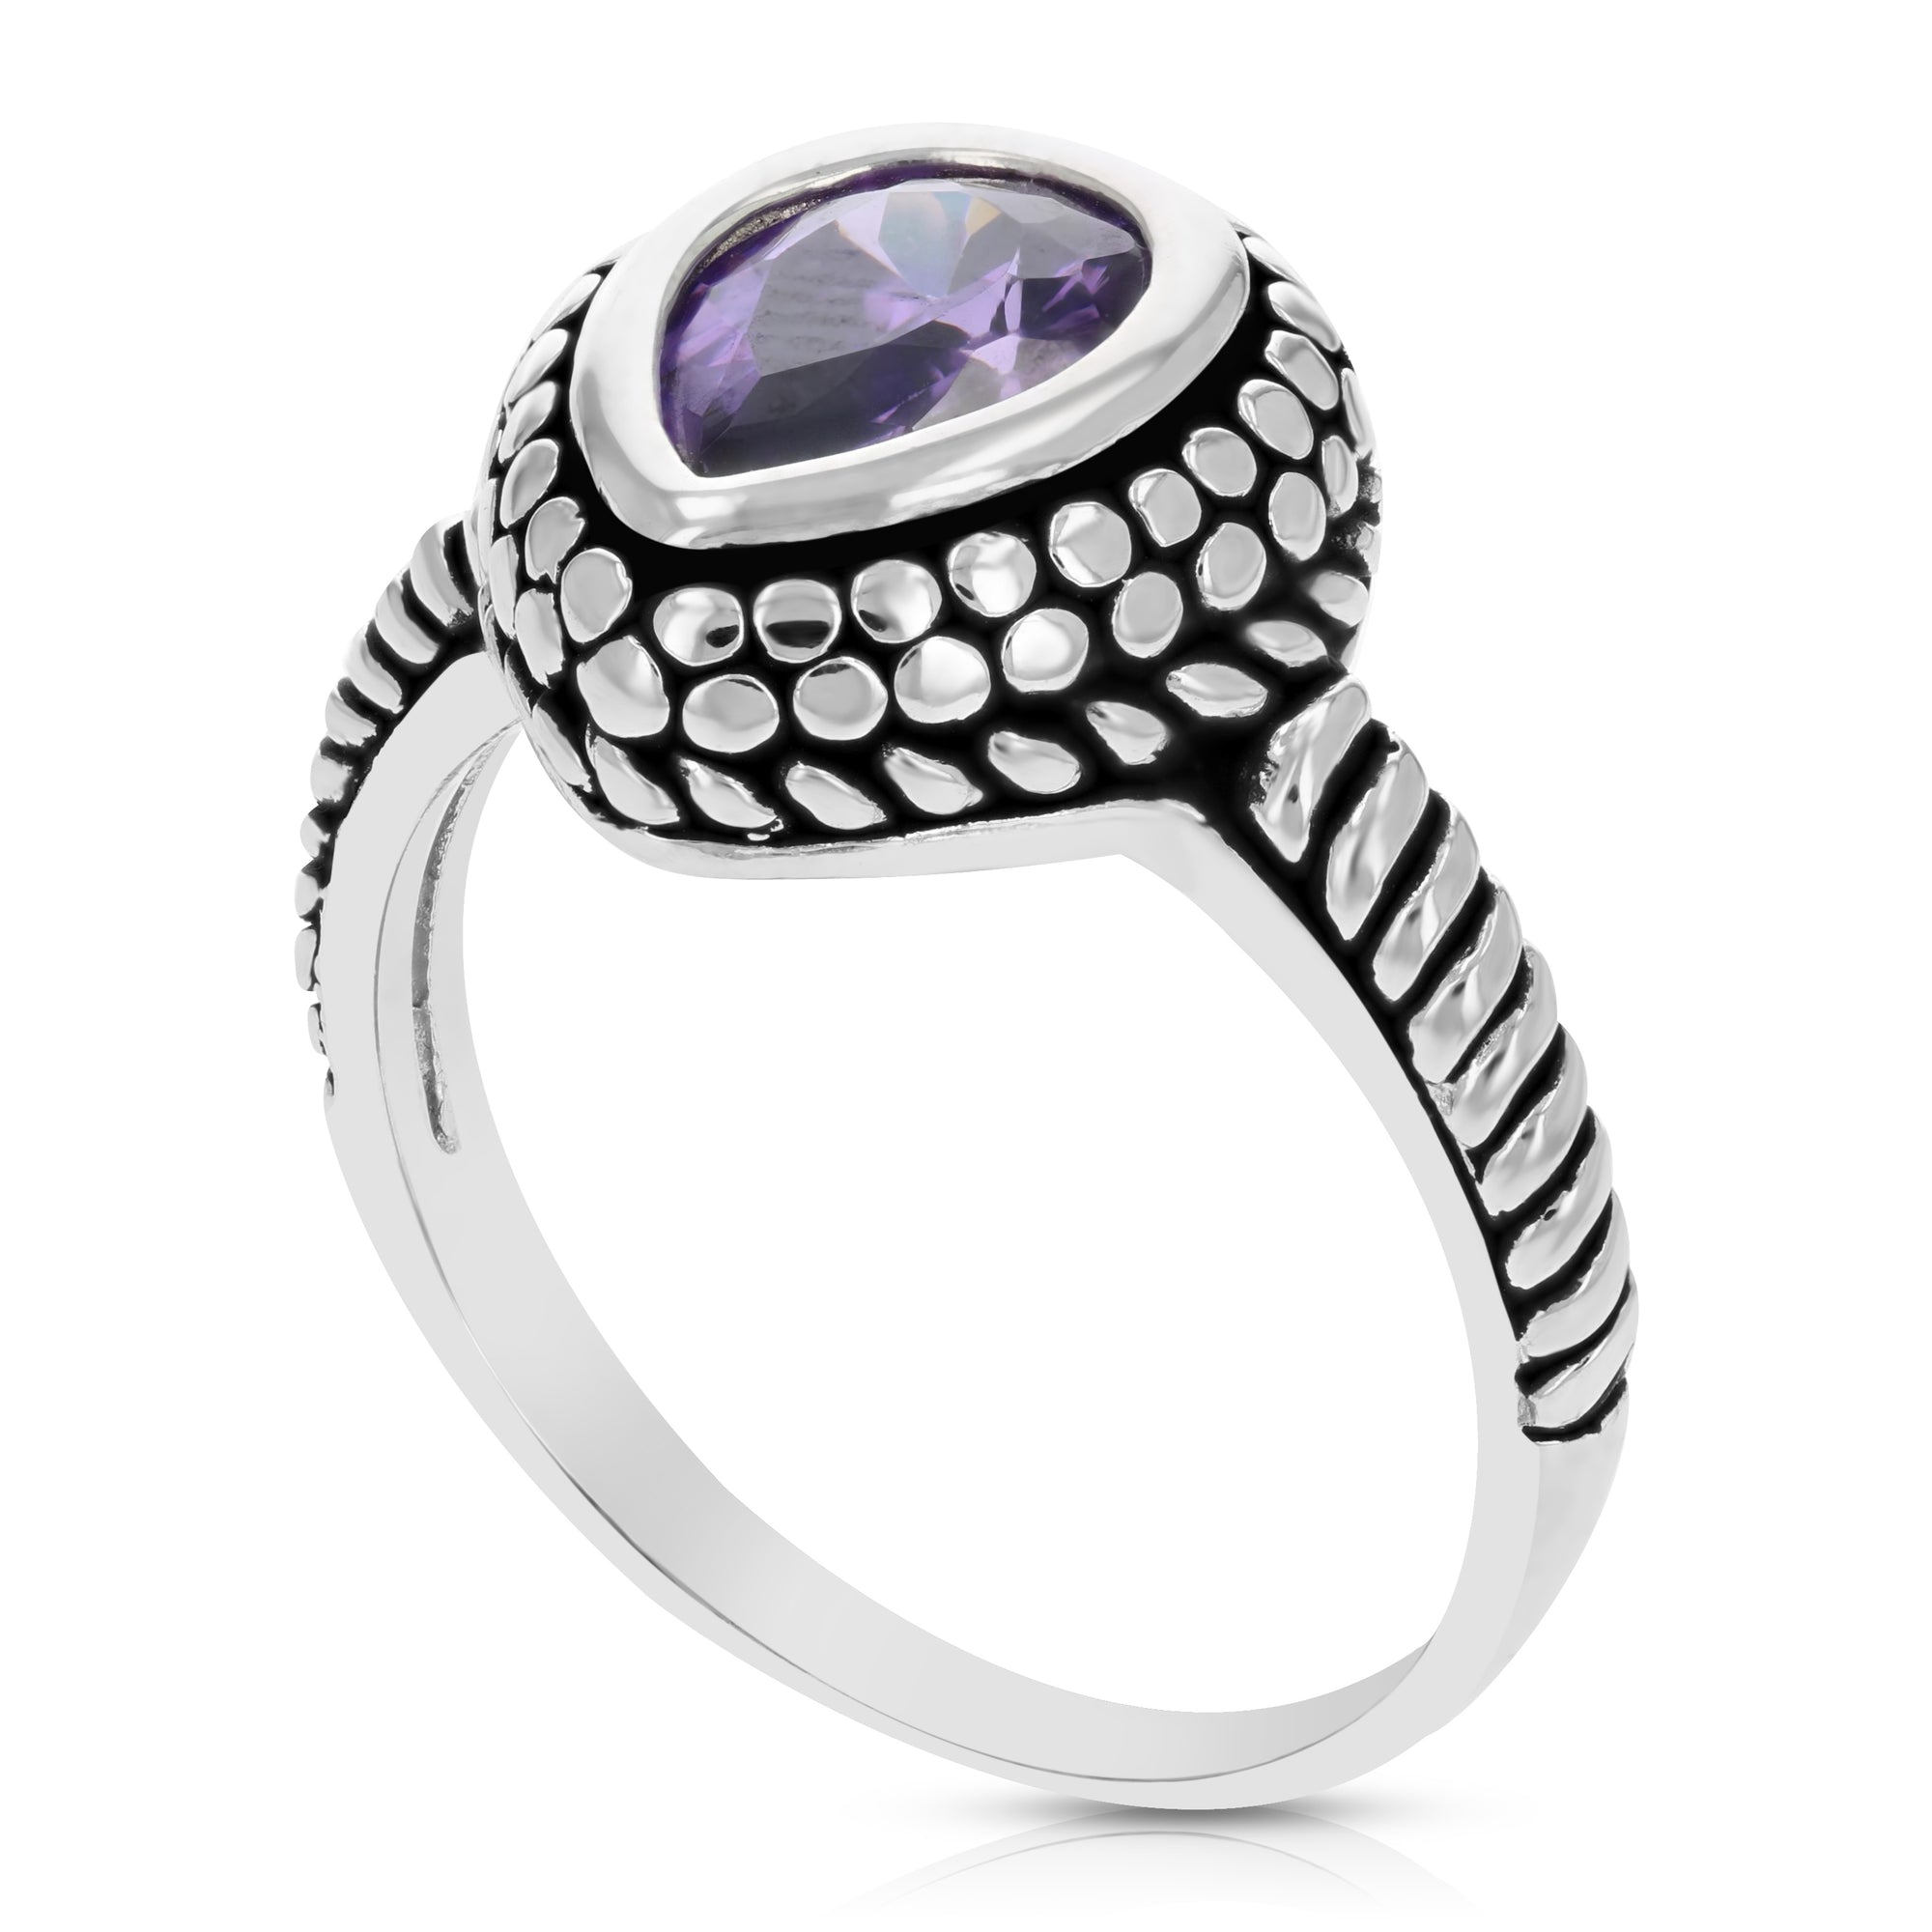 8x6 MM Purple Cubic Zirconia Pear Ring .925 Sterling Silver with Rhodium Plating